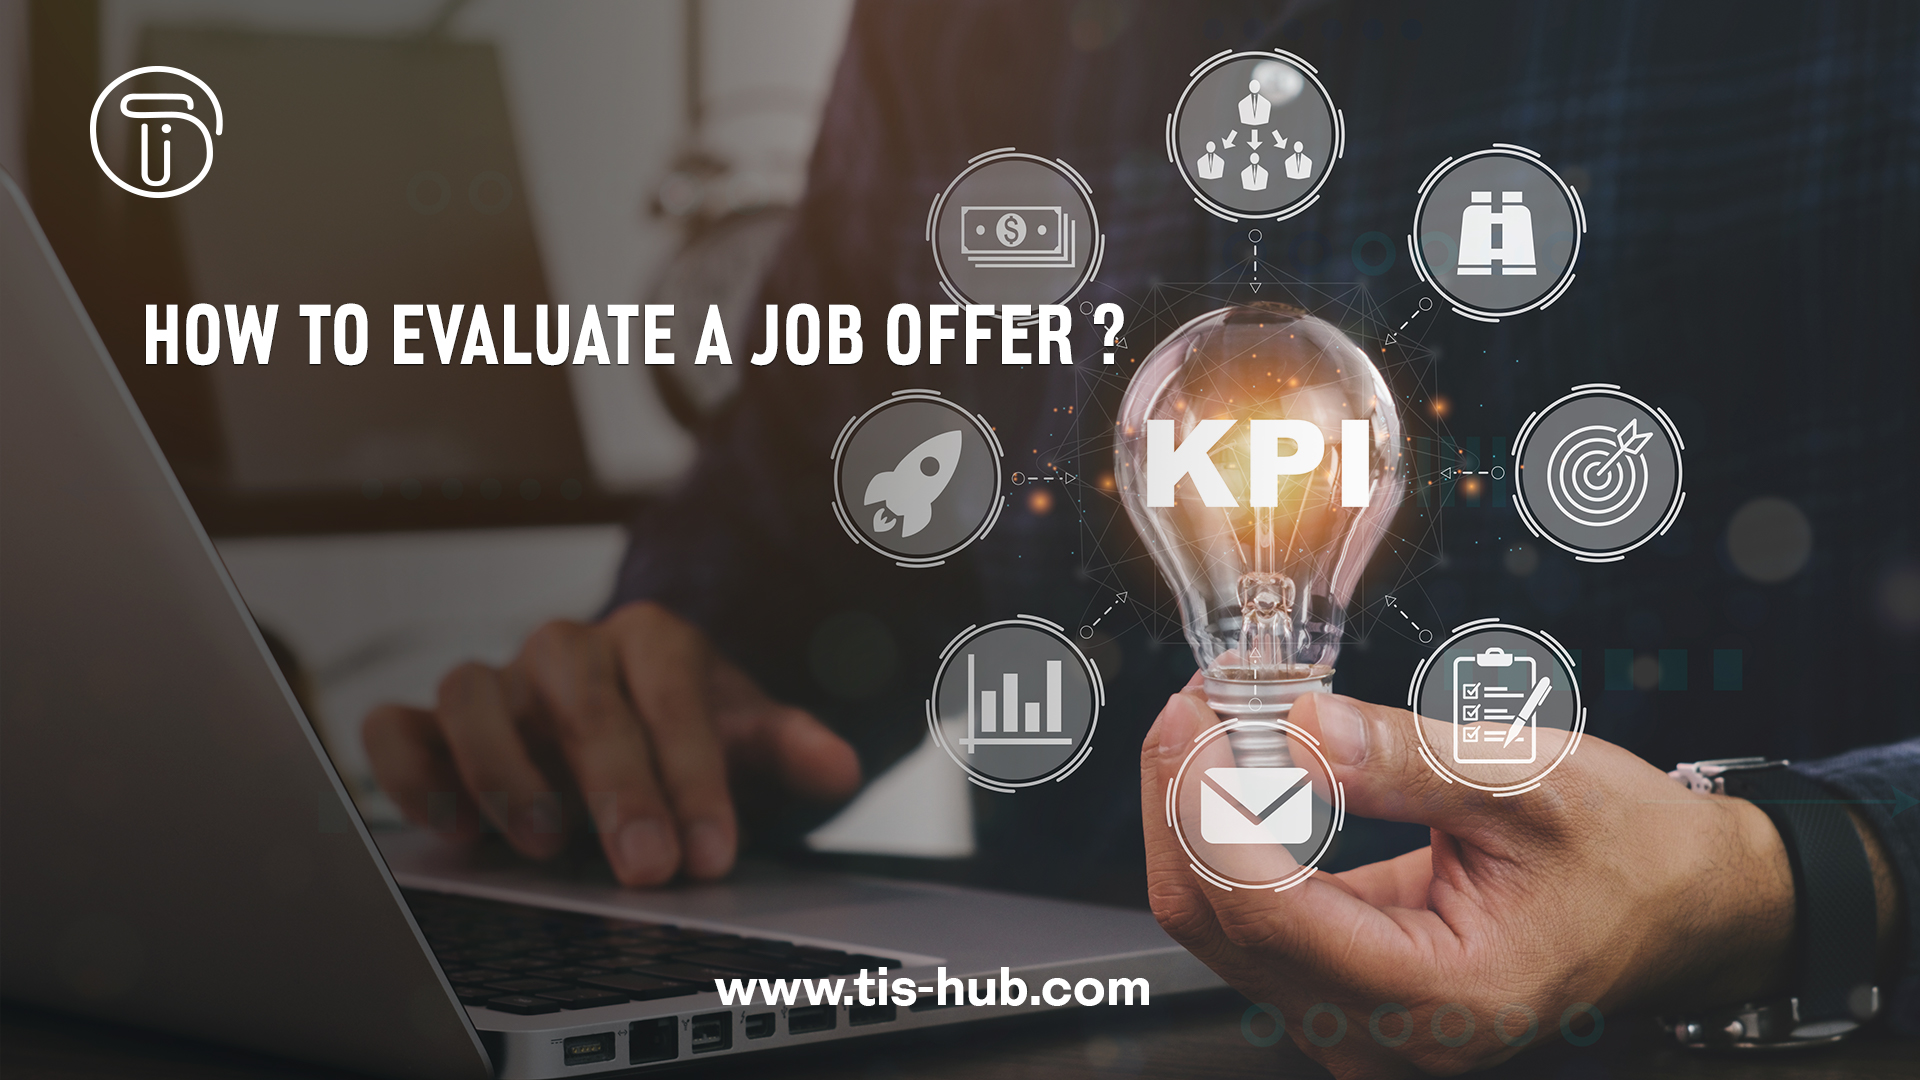 How to evaluate a job offer?